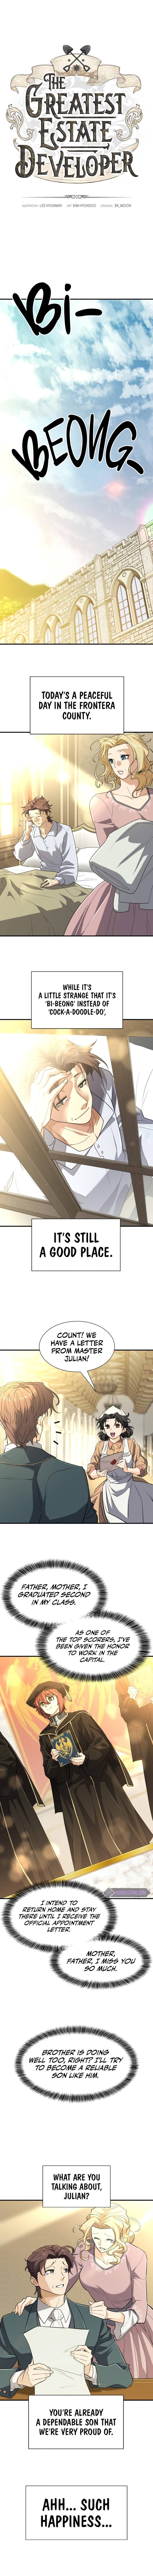 The Greatest Estate Developer Chapter 99 page 2